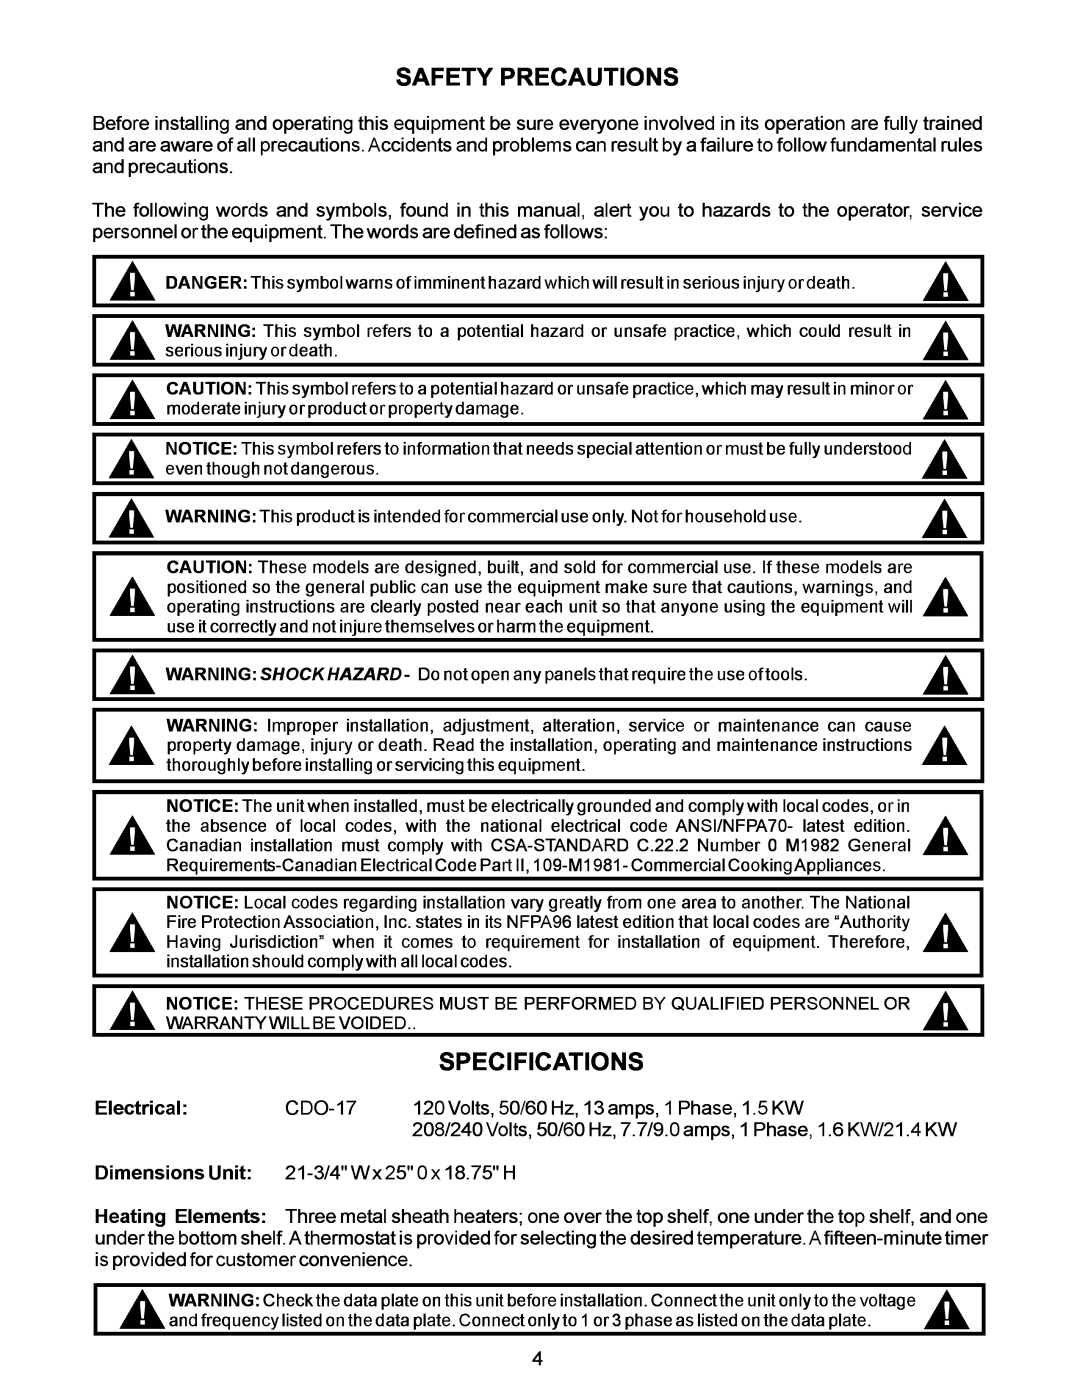 APW Wyott CDO-17 operating instructions Safety Precautions, Specifications 